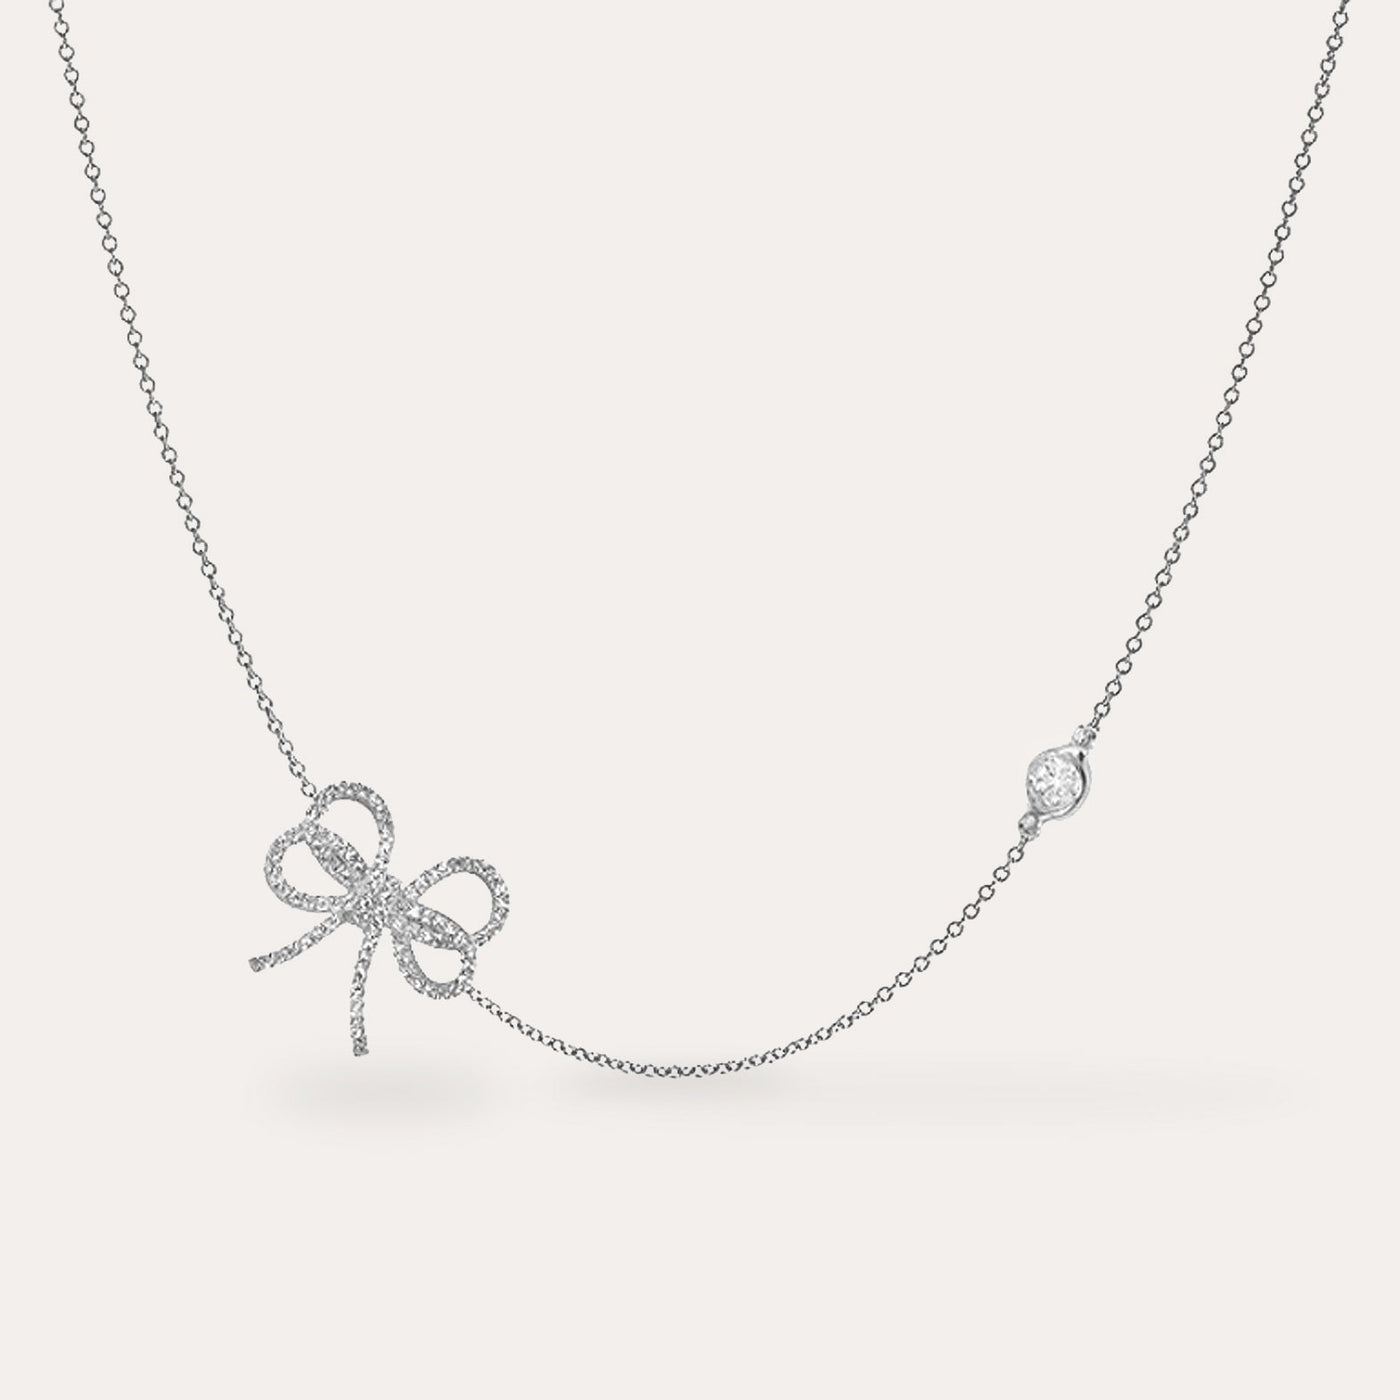 SILVER RIBBON NECKLACE